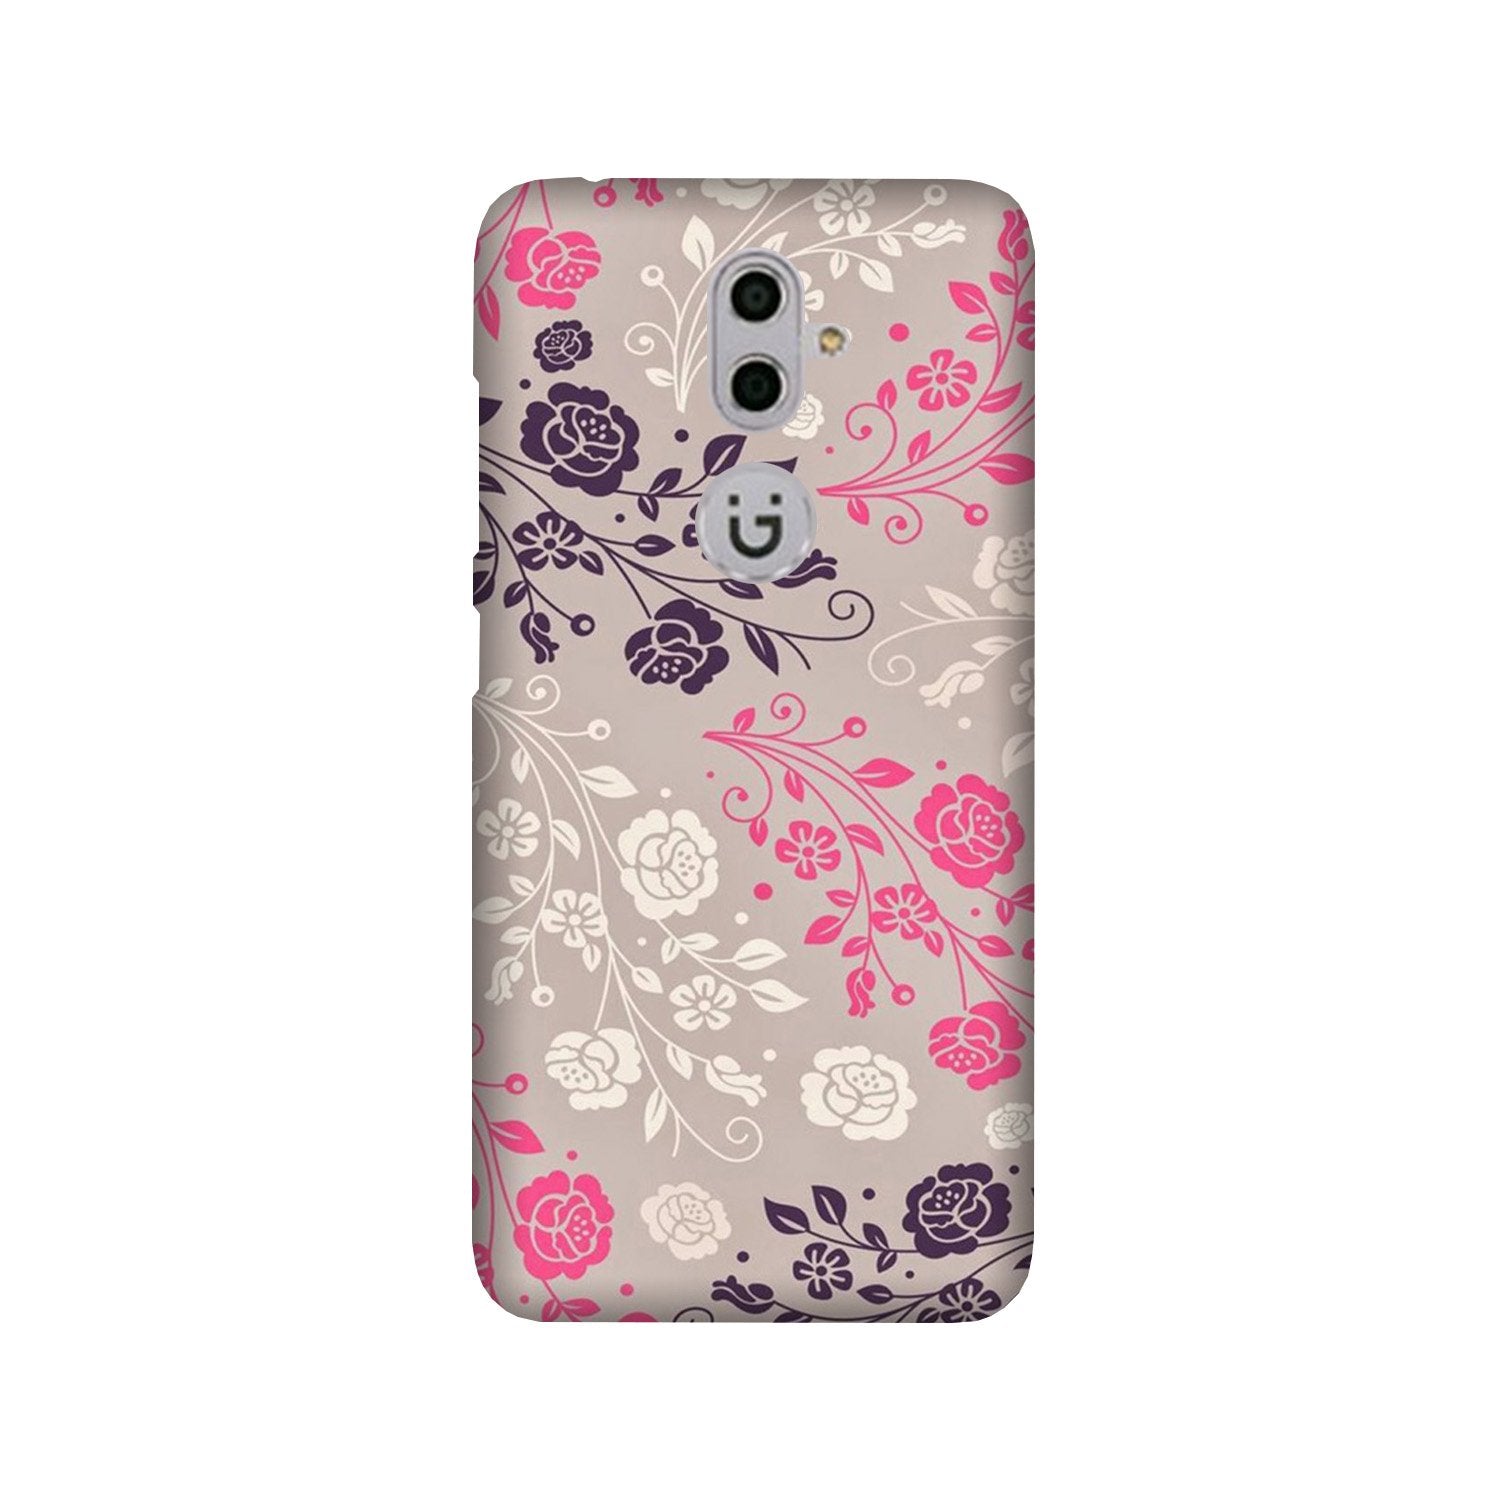 Pattern2 Case for Gionee S9